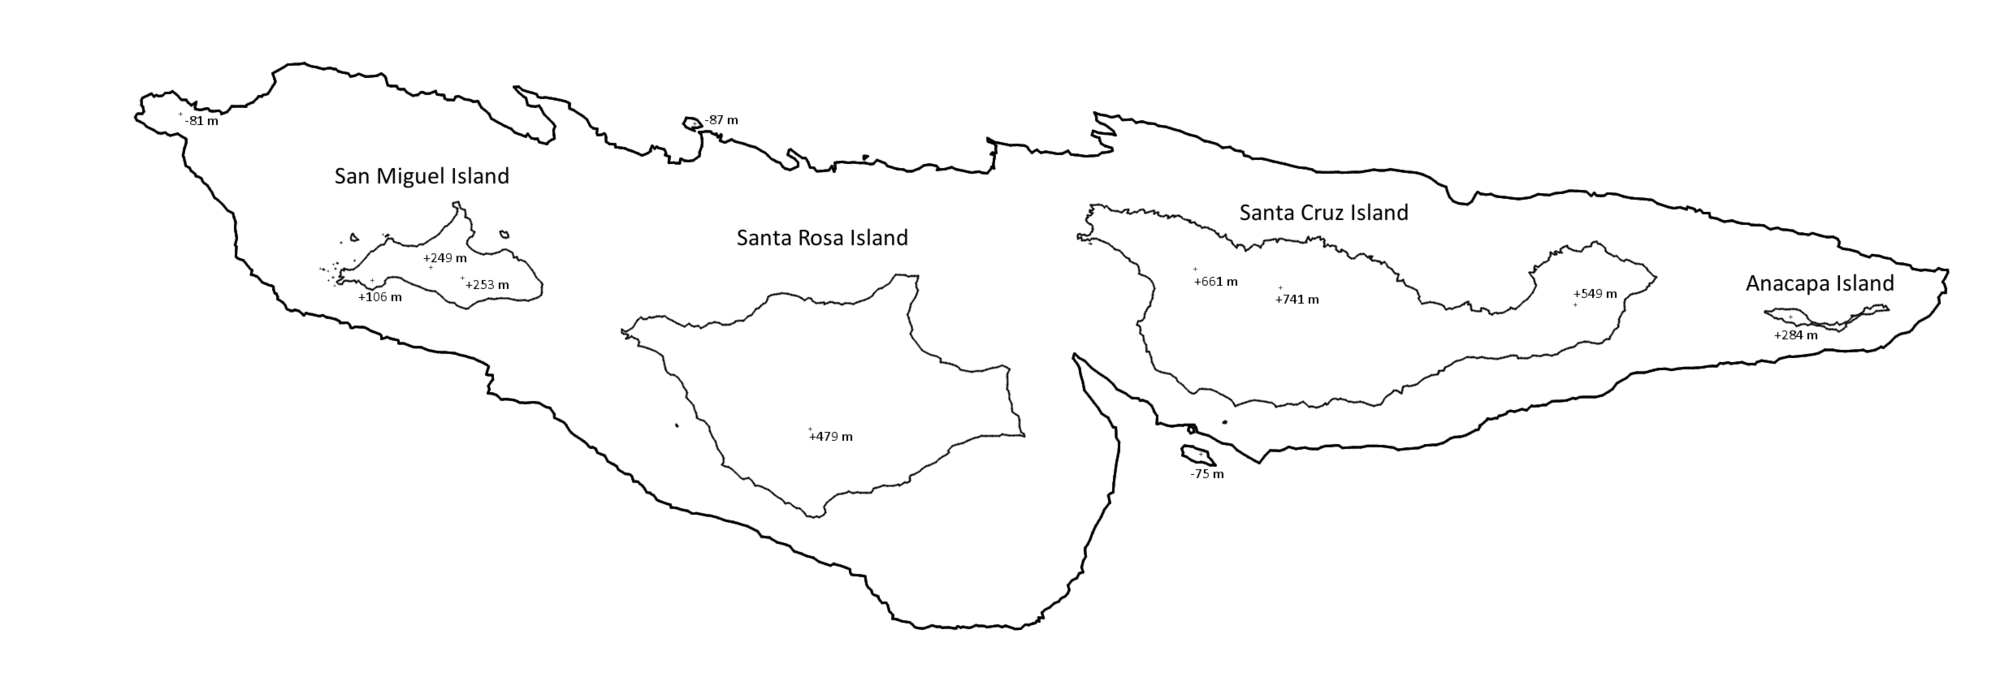 An approximate map of the Channel Islands' land extent roughly 14,000 years ago, showing their historical connection to each other. While they are currently separated from mainland California by a 230 meters (750 feet) deep channel, at this point in history they were only 7.8 kilometers (4.8 miles) from the mainland compared to the modern 19 kilometers (12 miles), making prehistoric travel between them much easier.